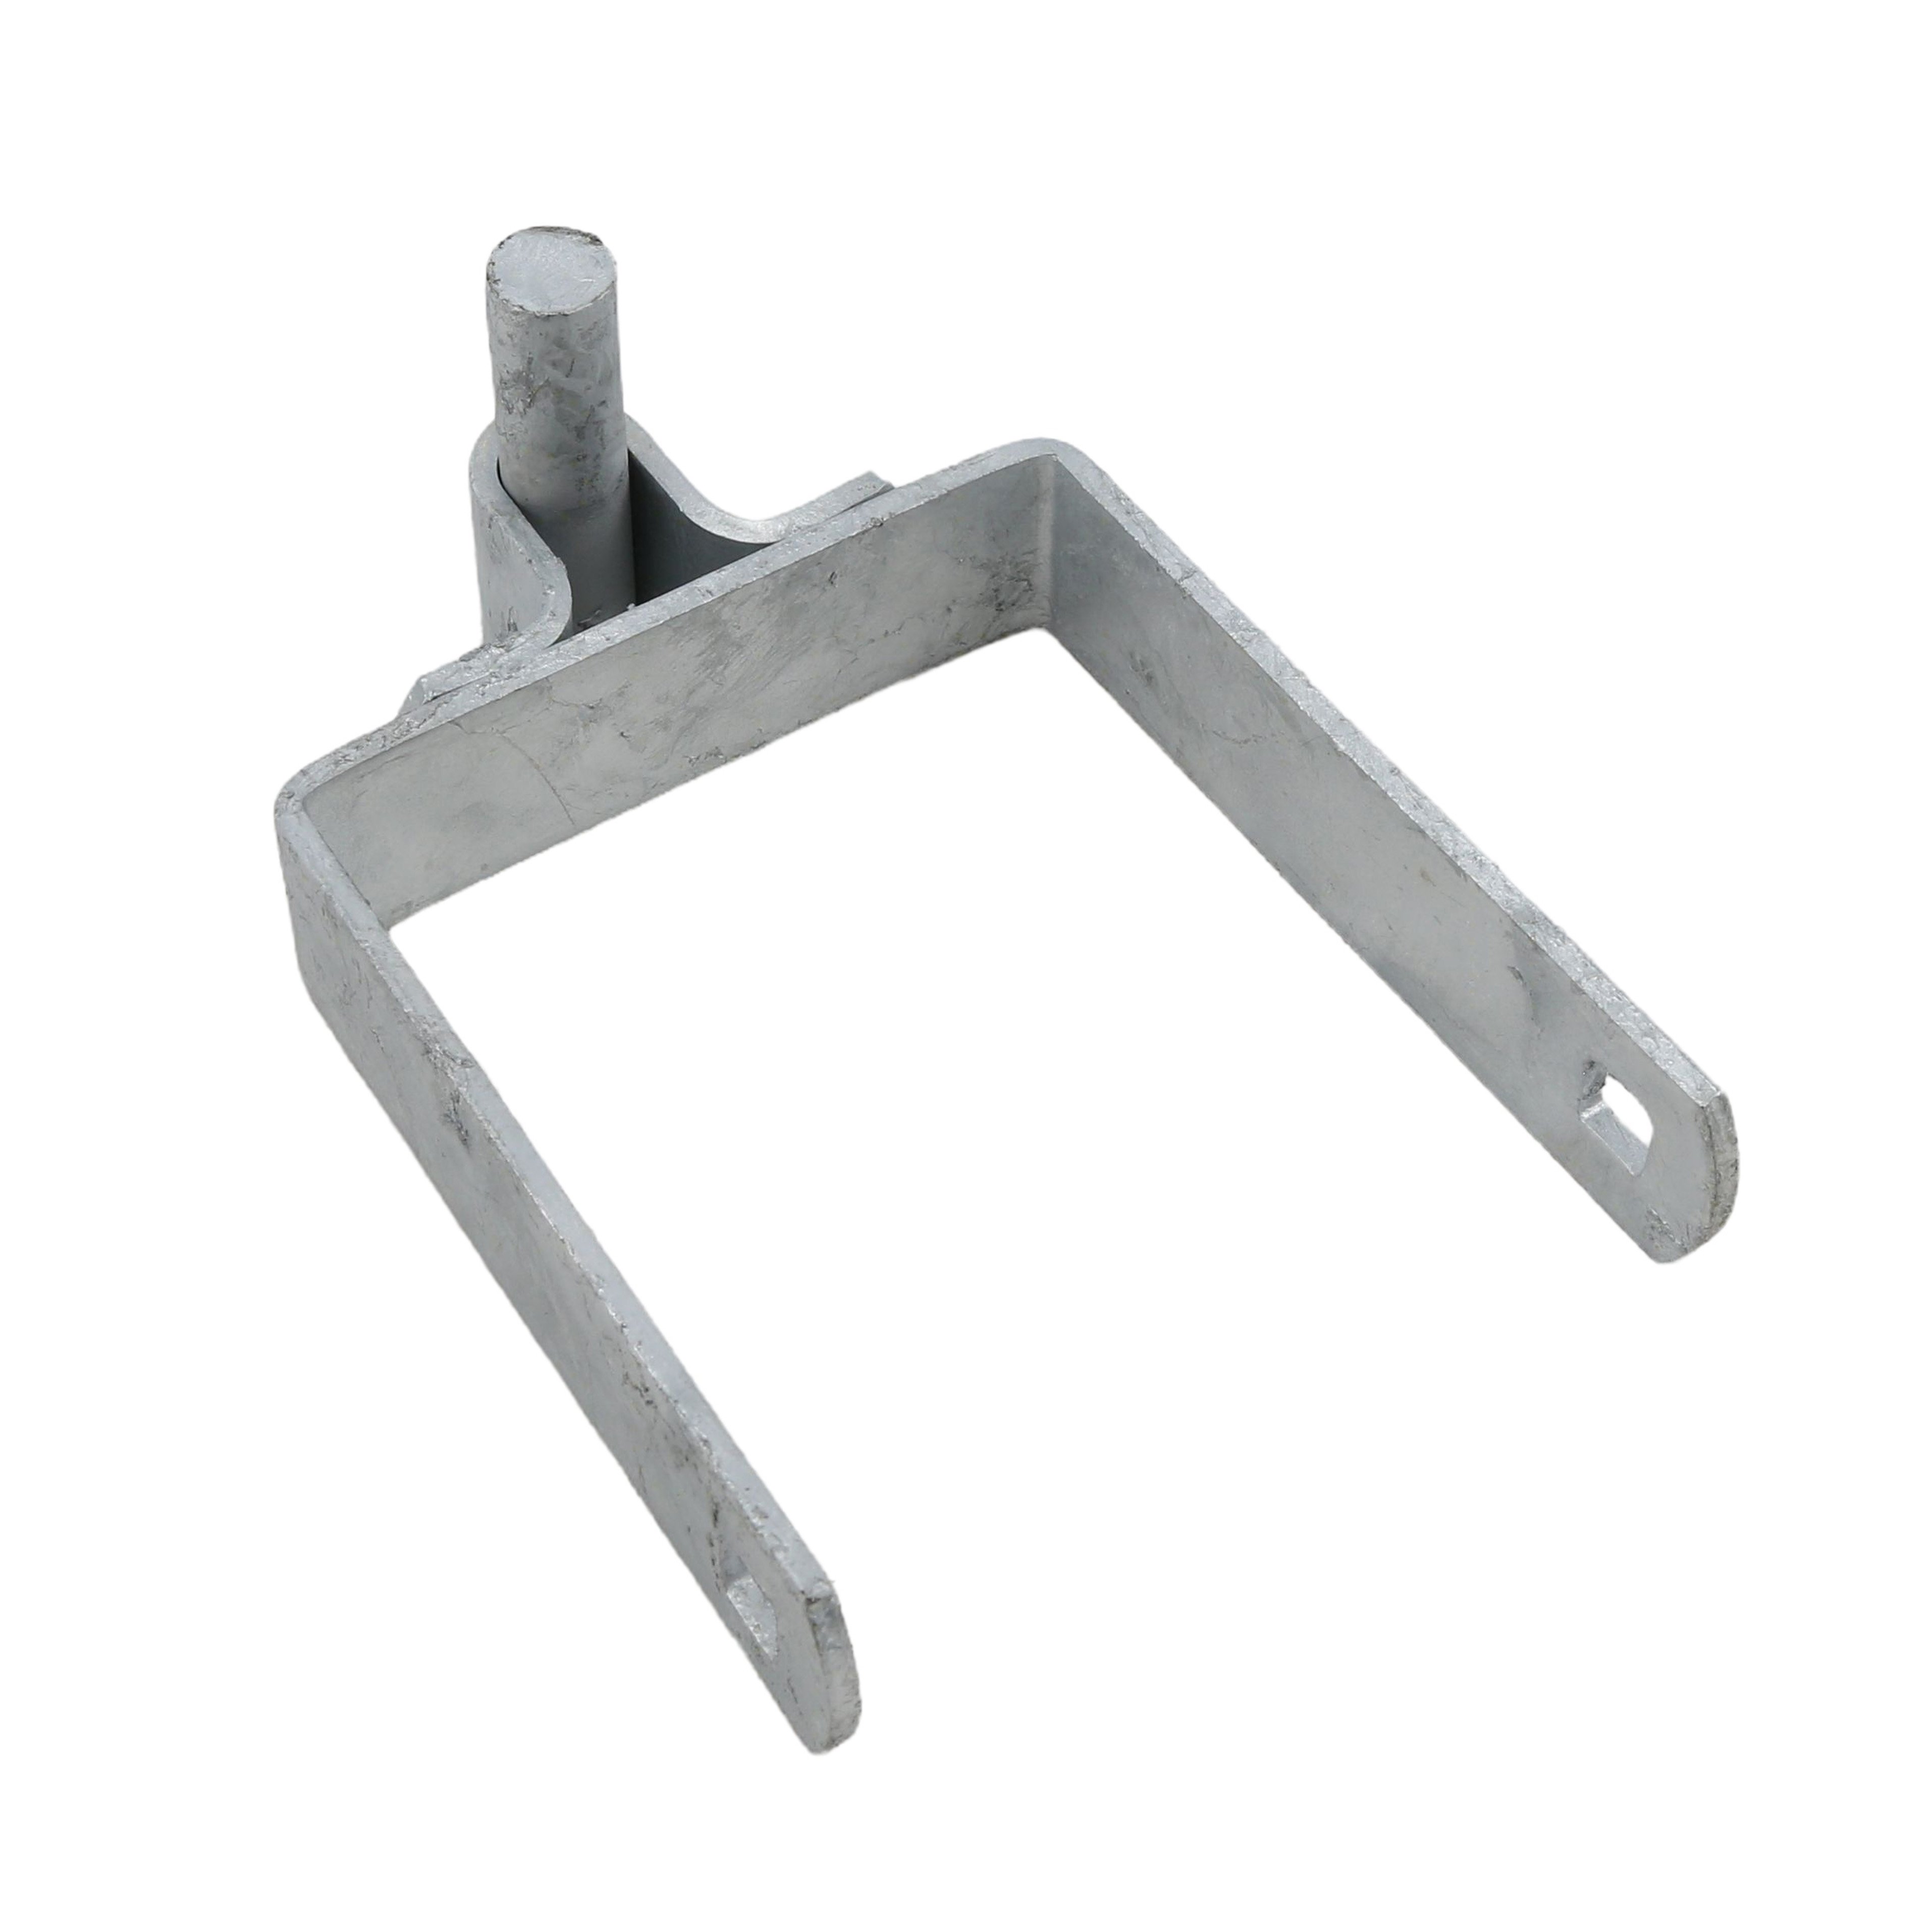 24 X 4 Square Male Gate Post Hinge Chain Link Galvanized Steel (5/8 Pintle)